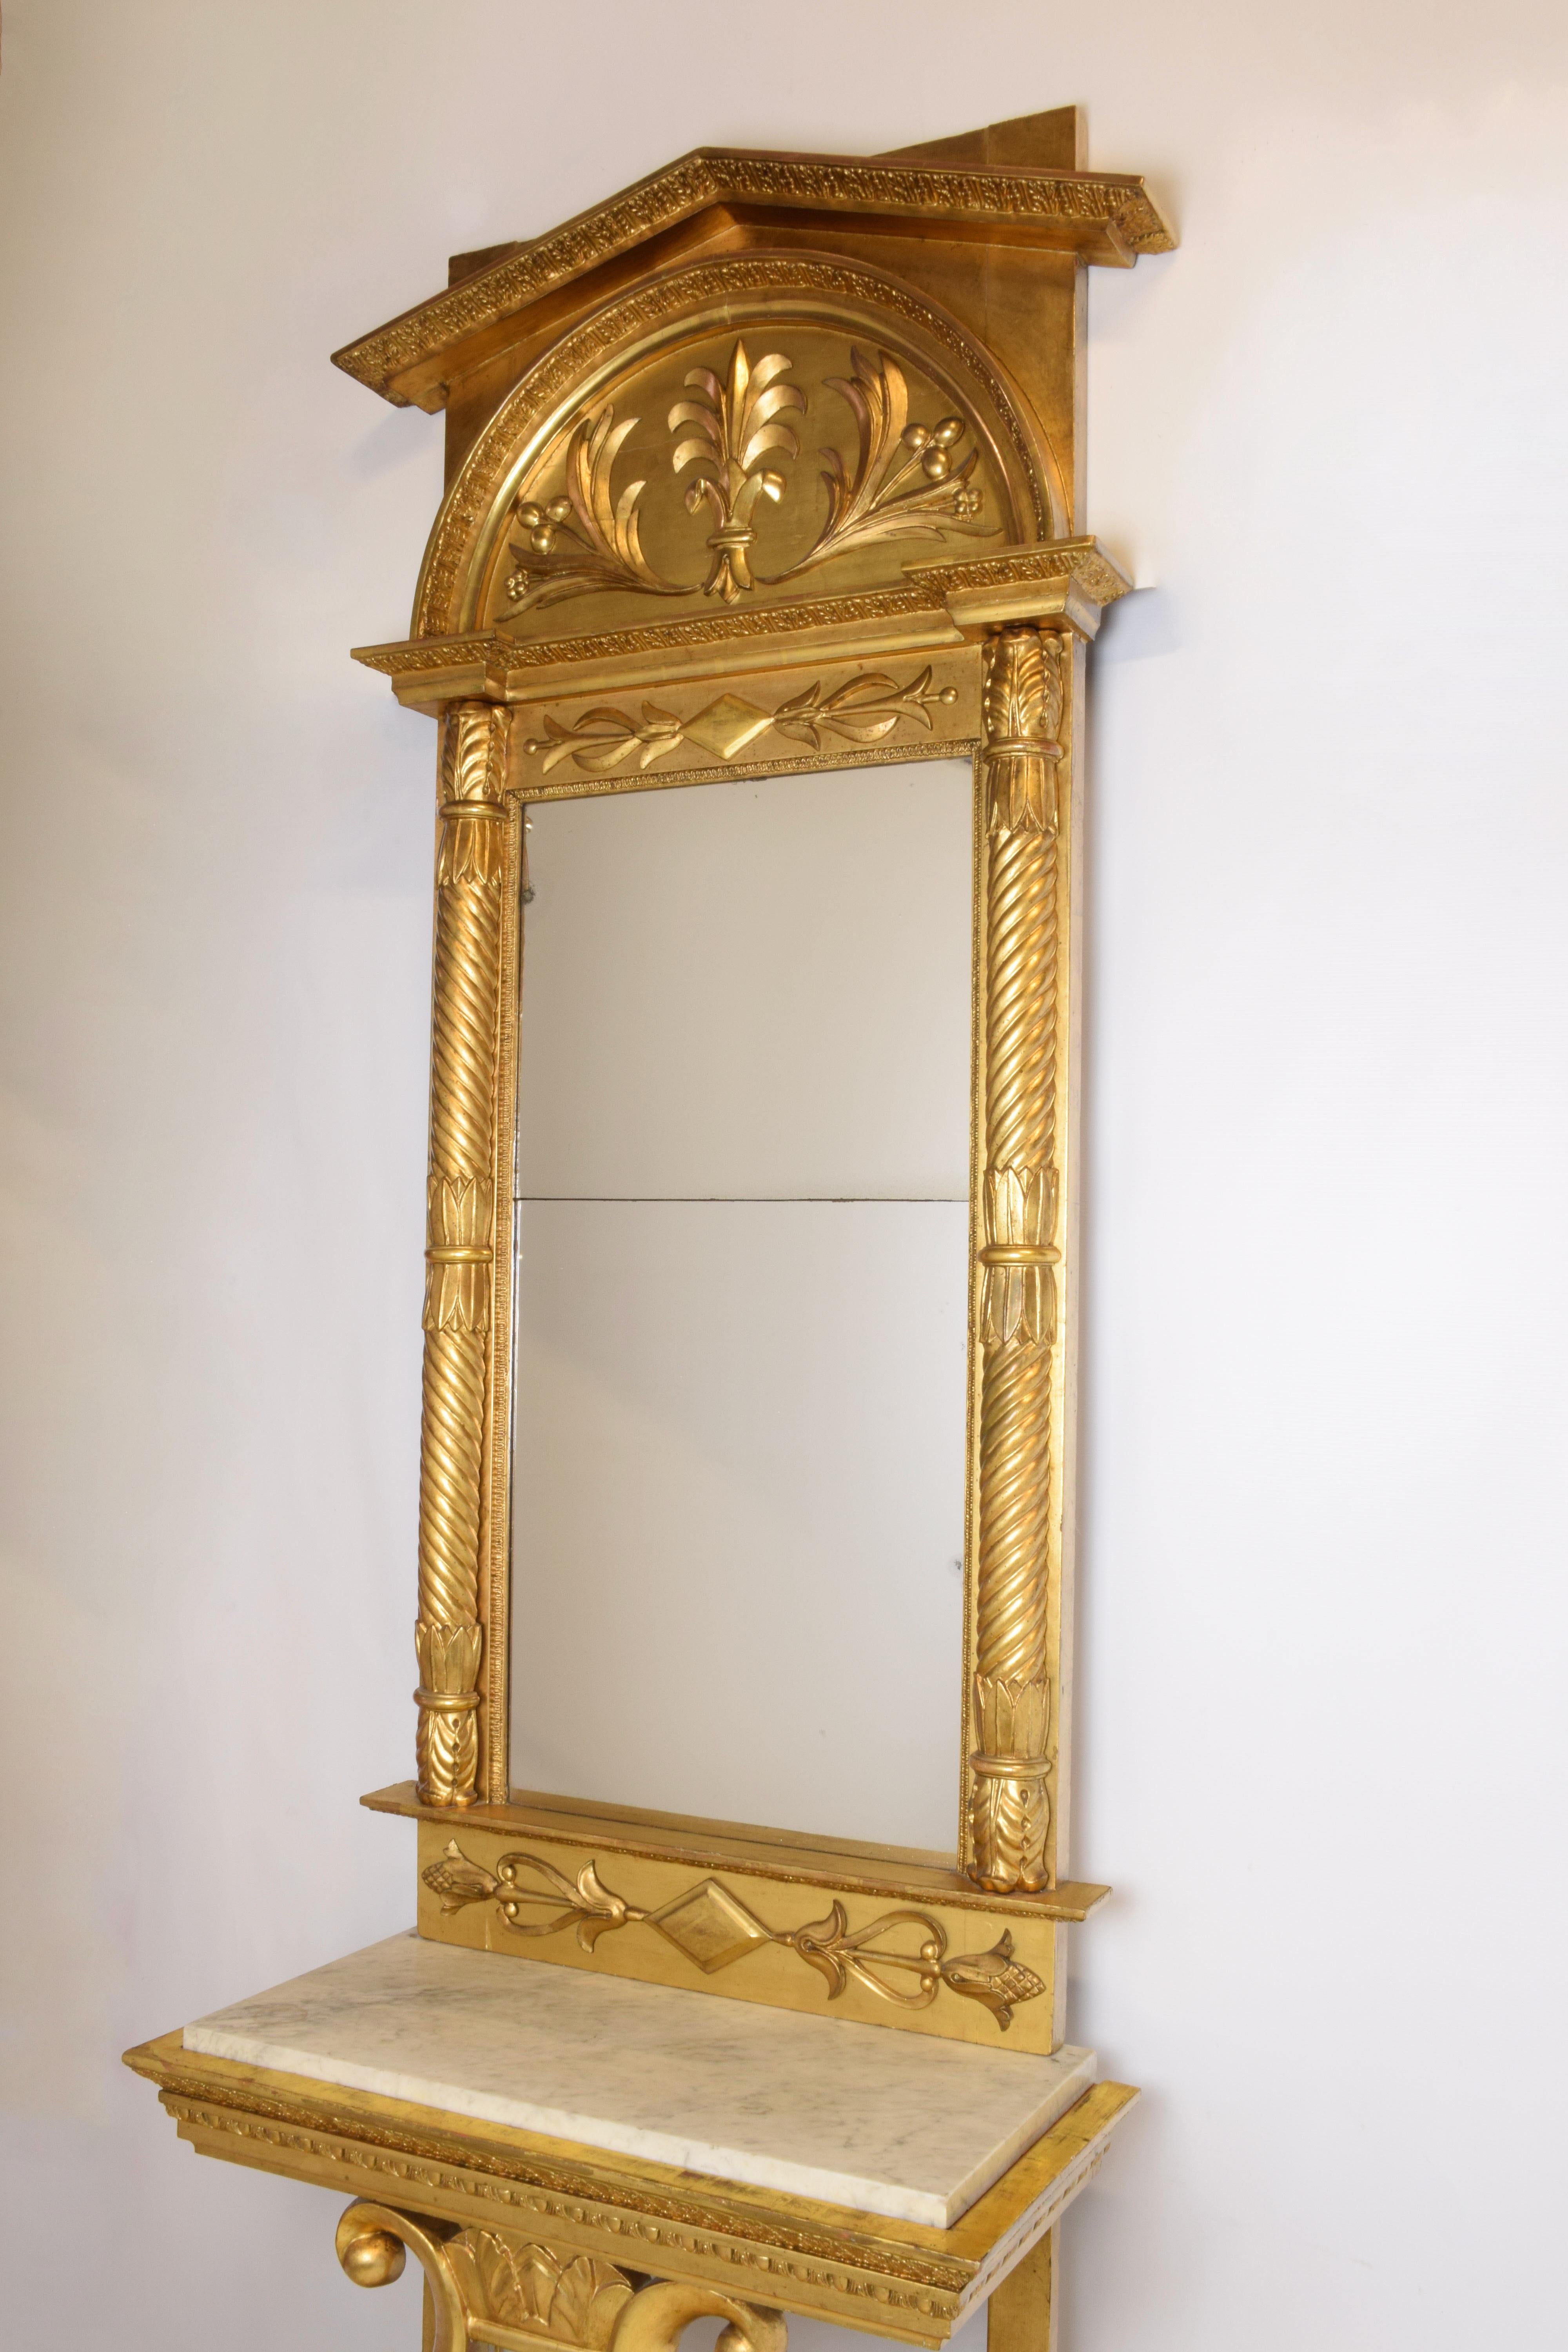 Early 19th century giltwood console table with a lyre supporting the white marble top. Coordinated mirror with decoration. 
Authentic conditions, original marble, two-part mirror plate.
Wooden base decorated to imitate a marble.